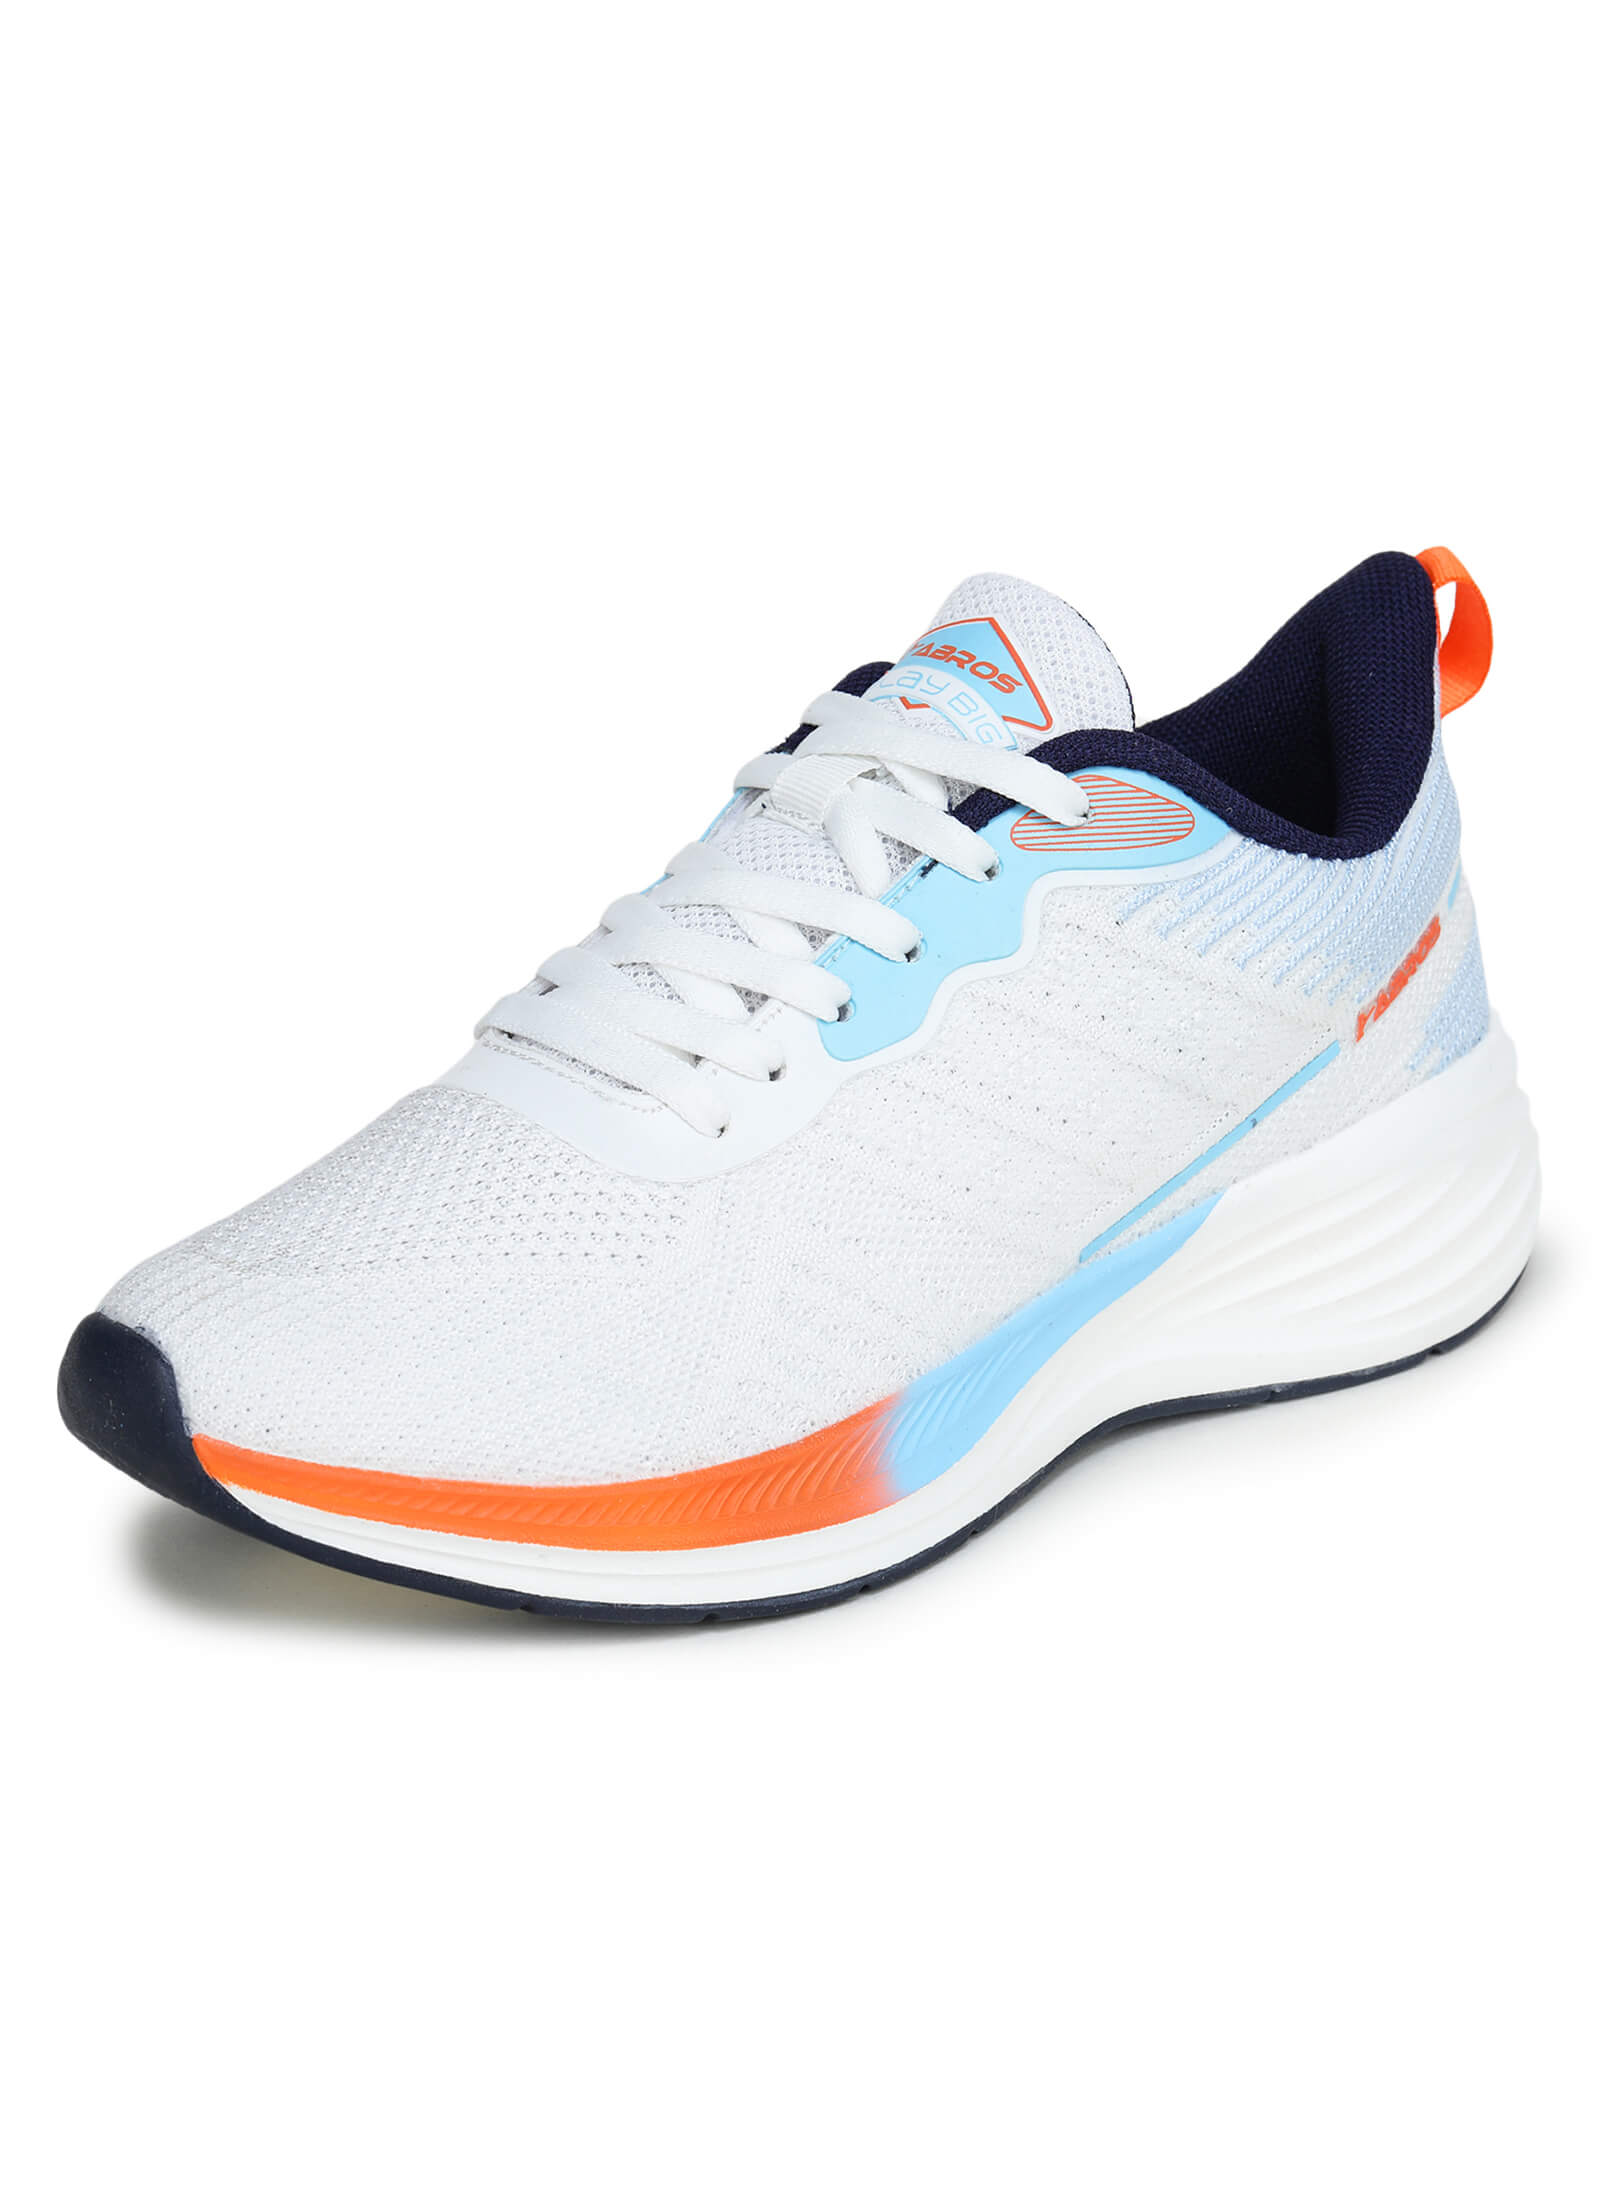 Dice Sports Shoes For Men